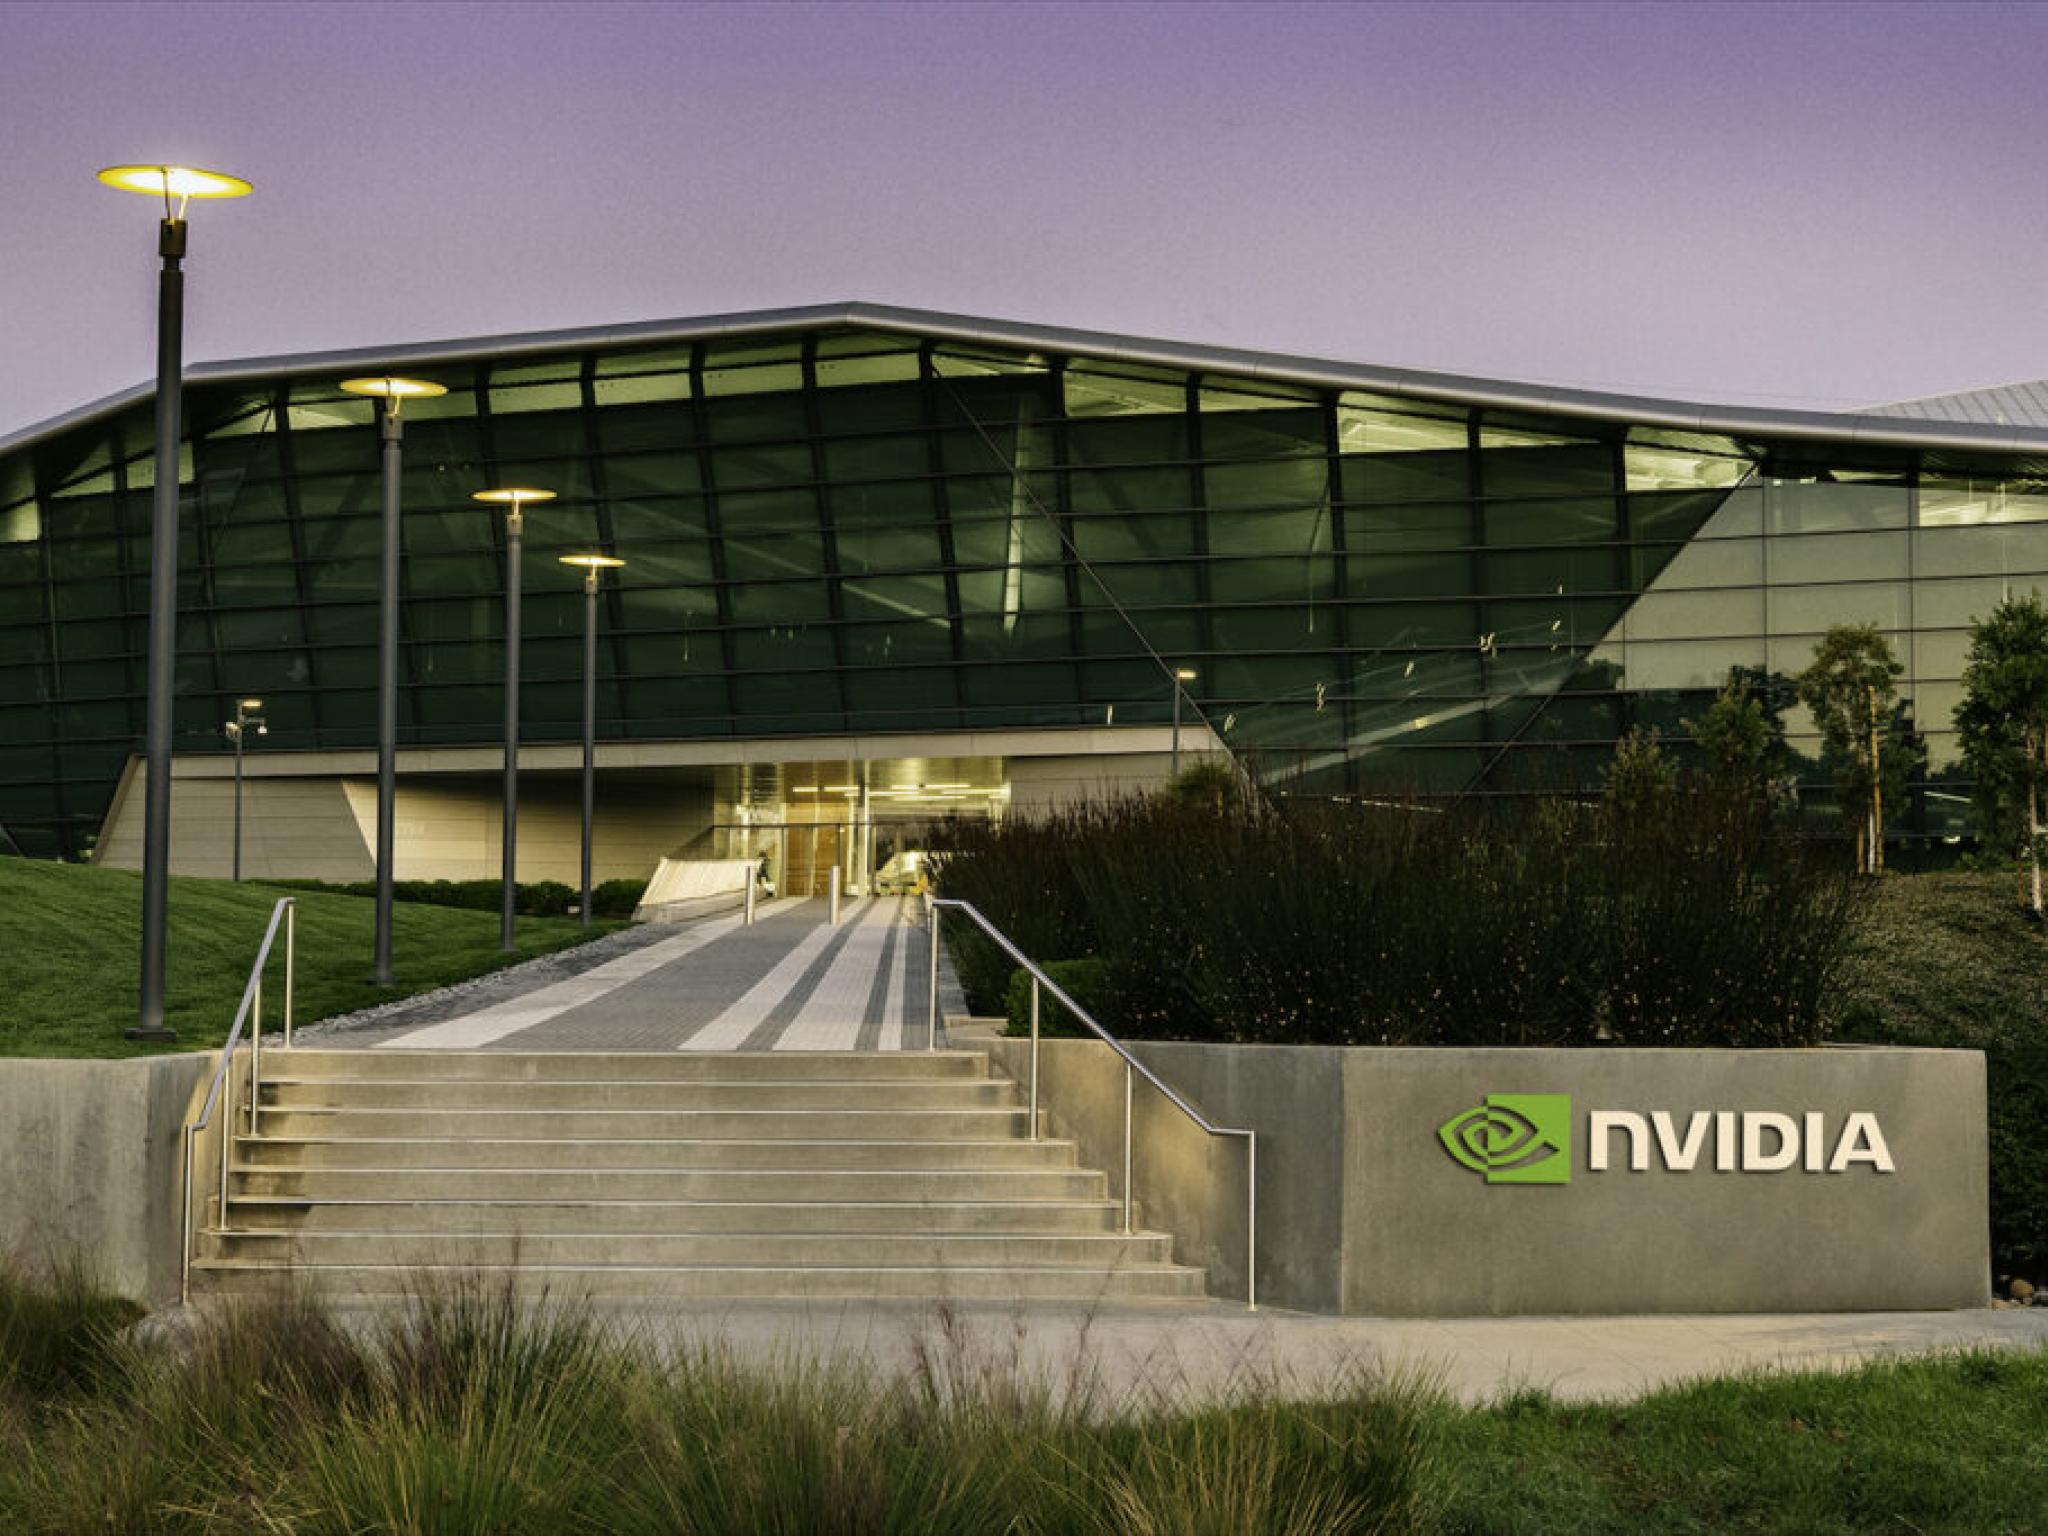  whats-going-on-with-nvidia-stock-monday 